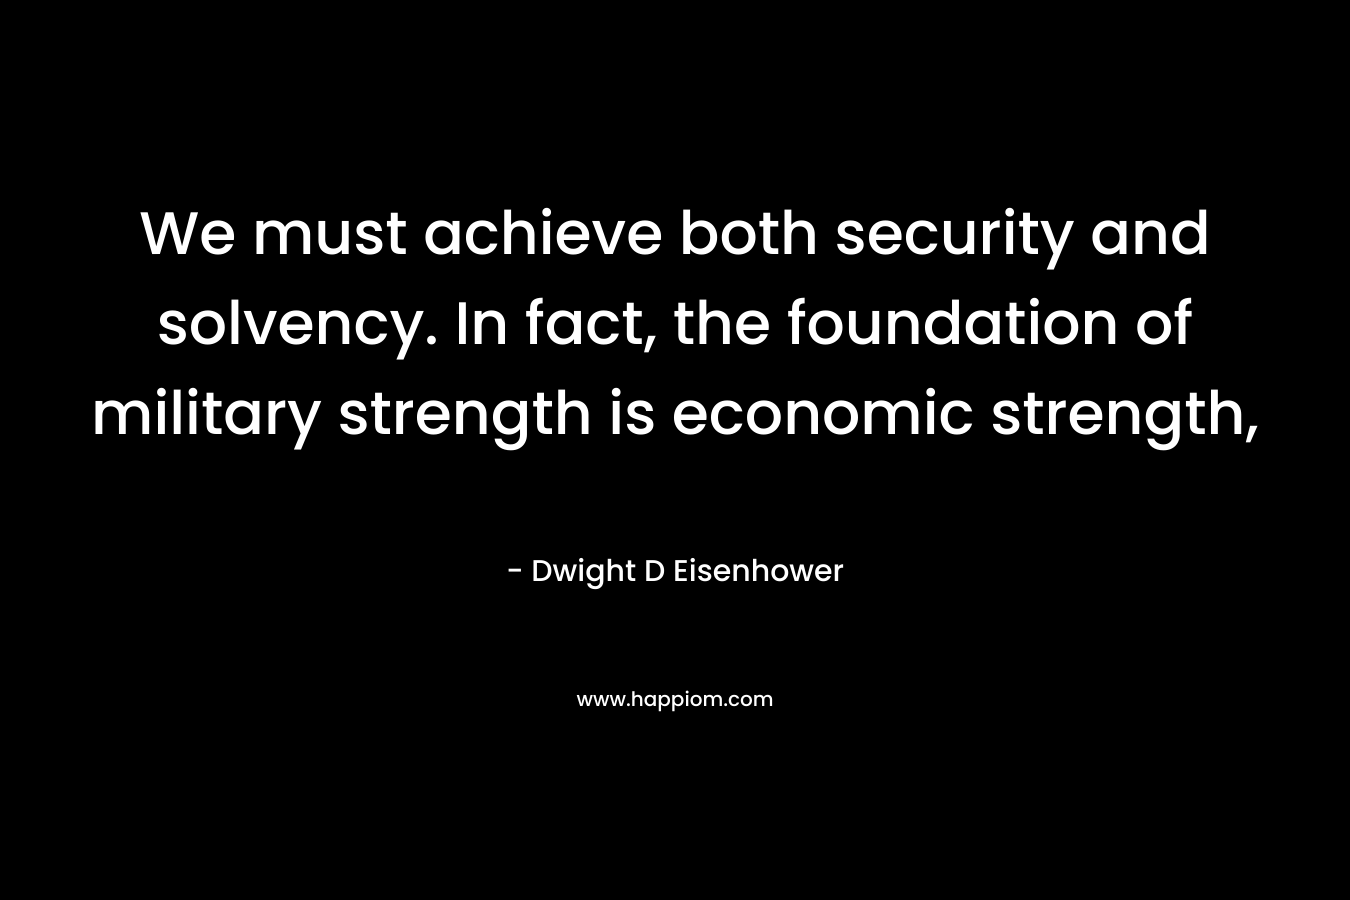 We must achieve both security and solvency. In fact, the foundation of military strength is economic strength, – Dwight D Eisenhower